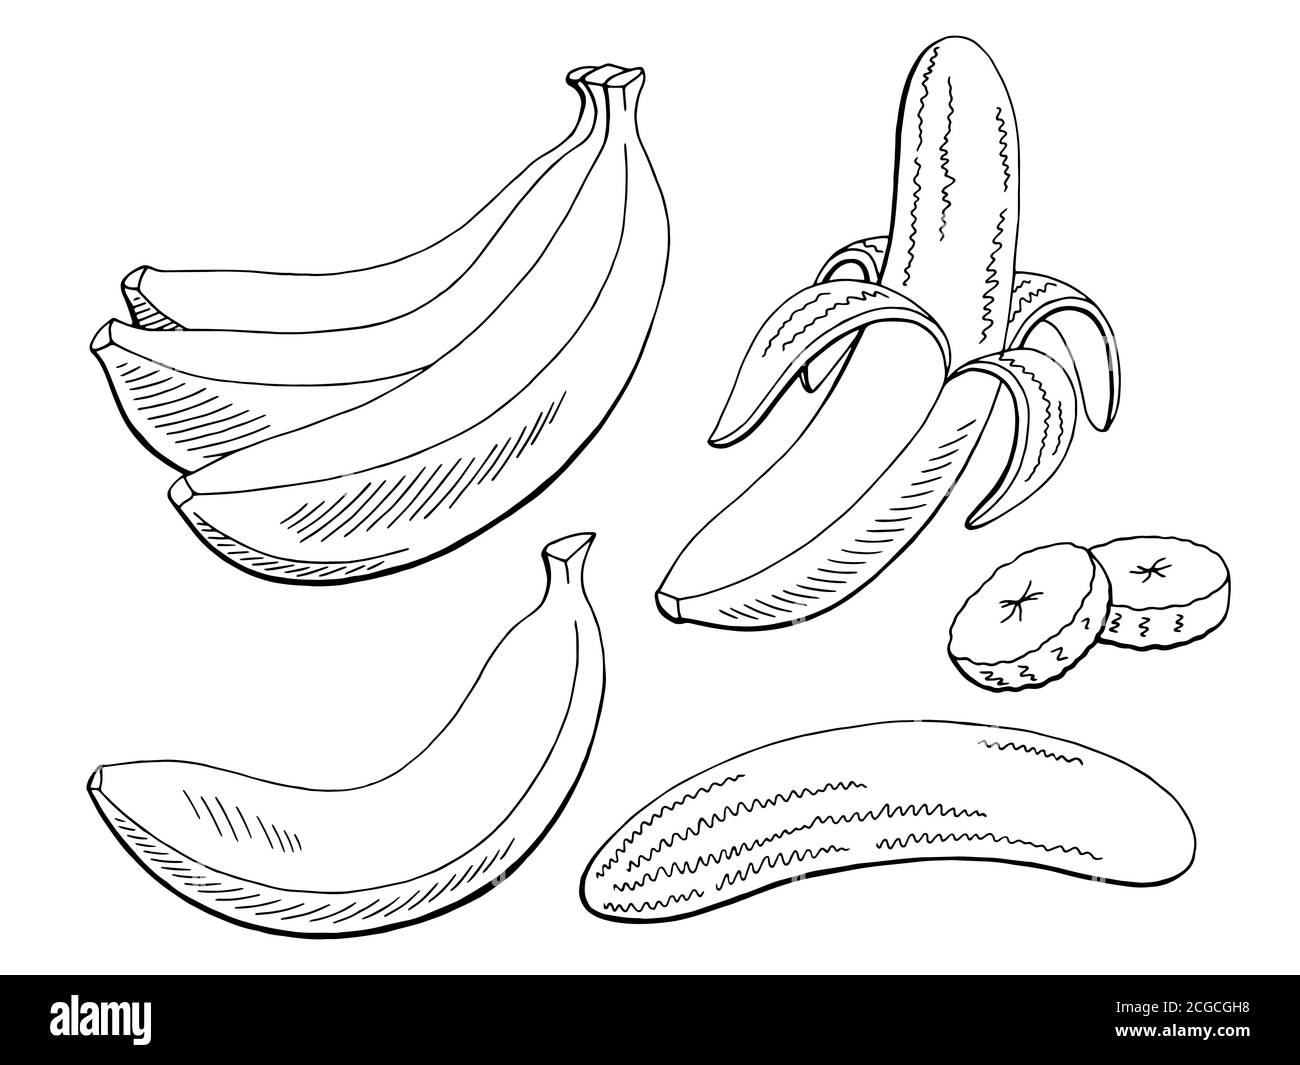 Discover 87+ sketch of banana fruit latest - in.eteachers